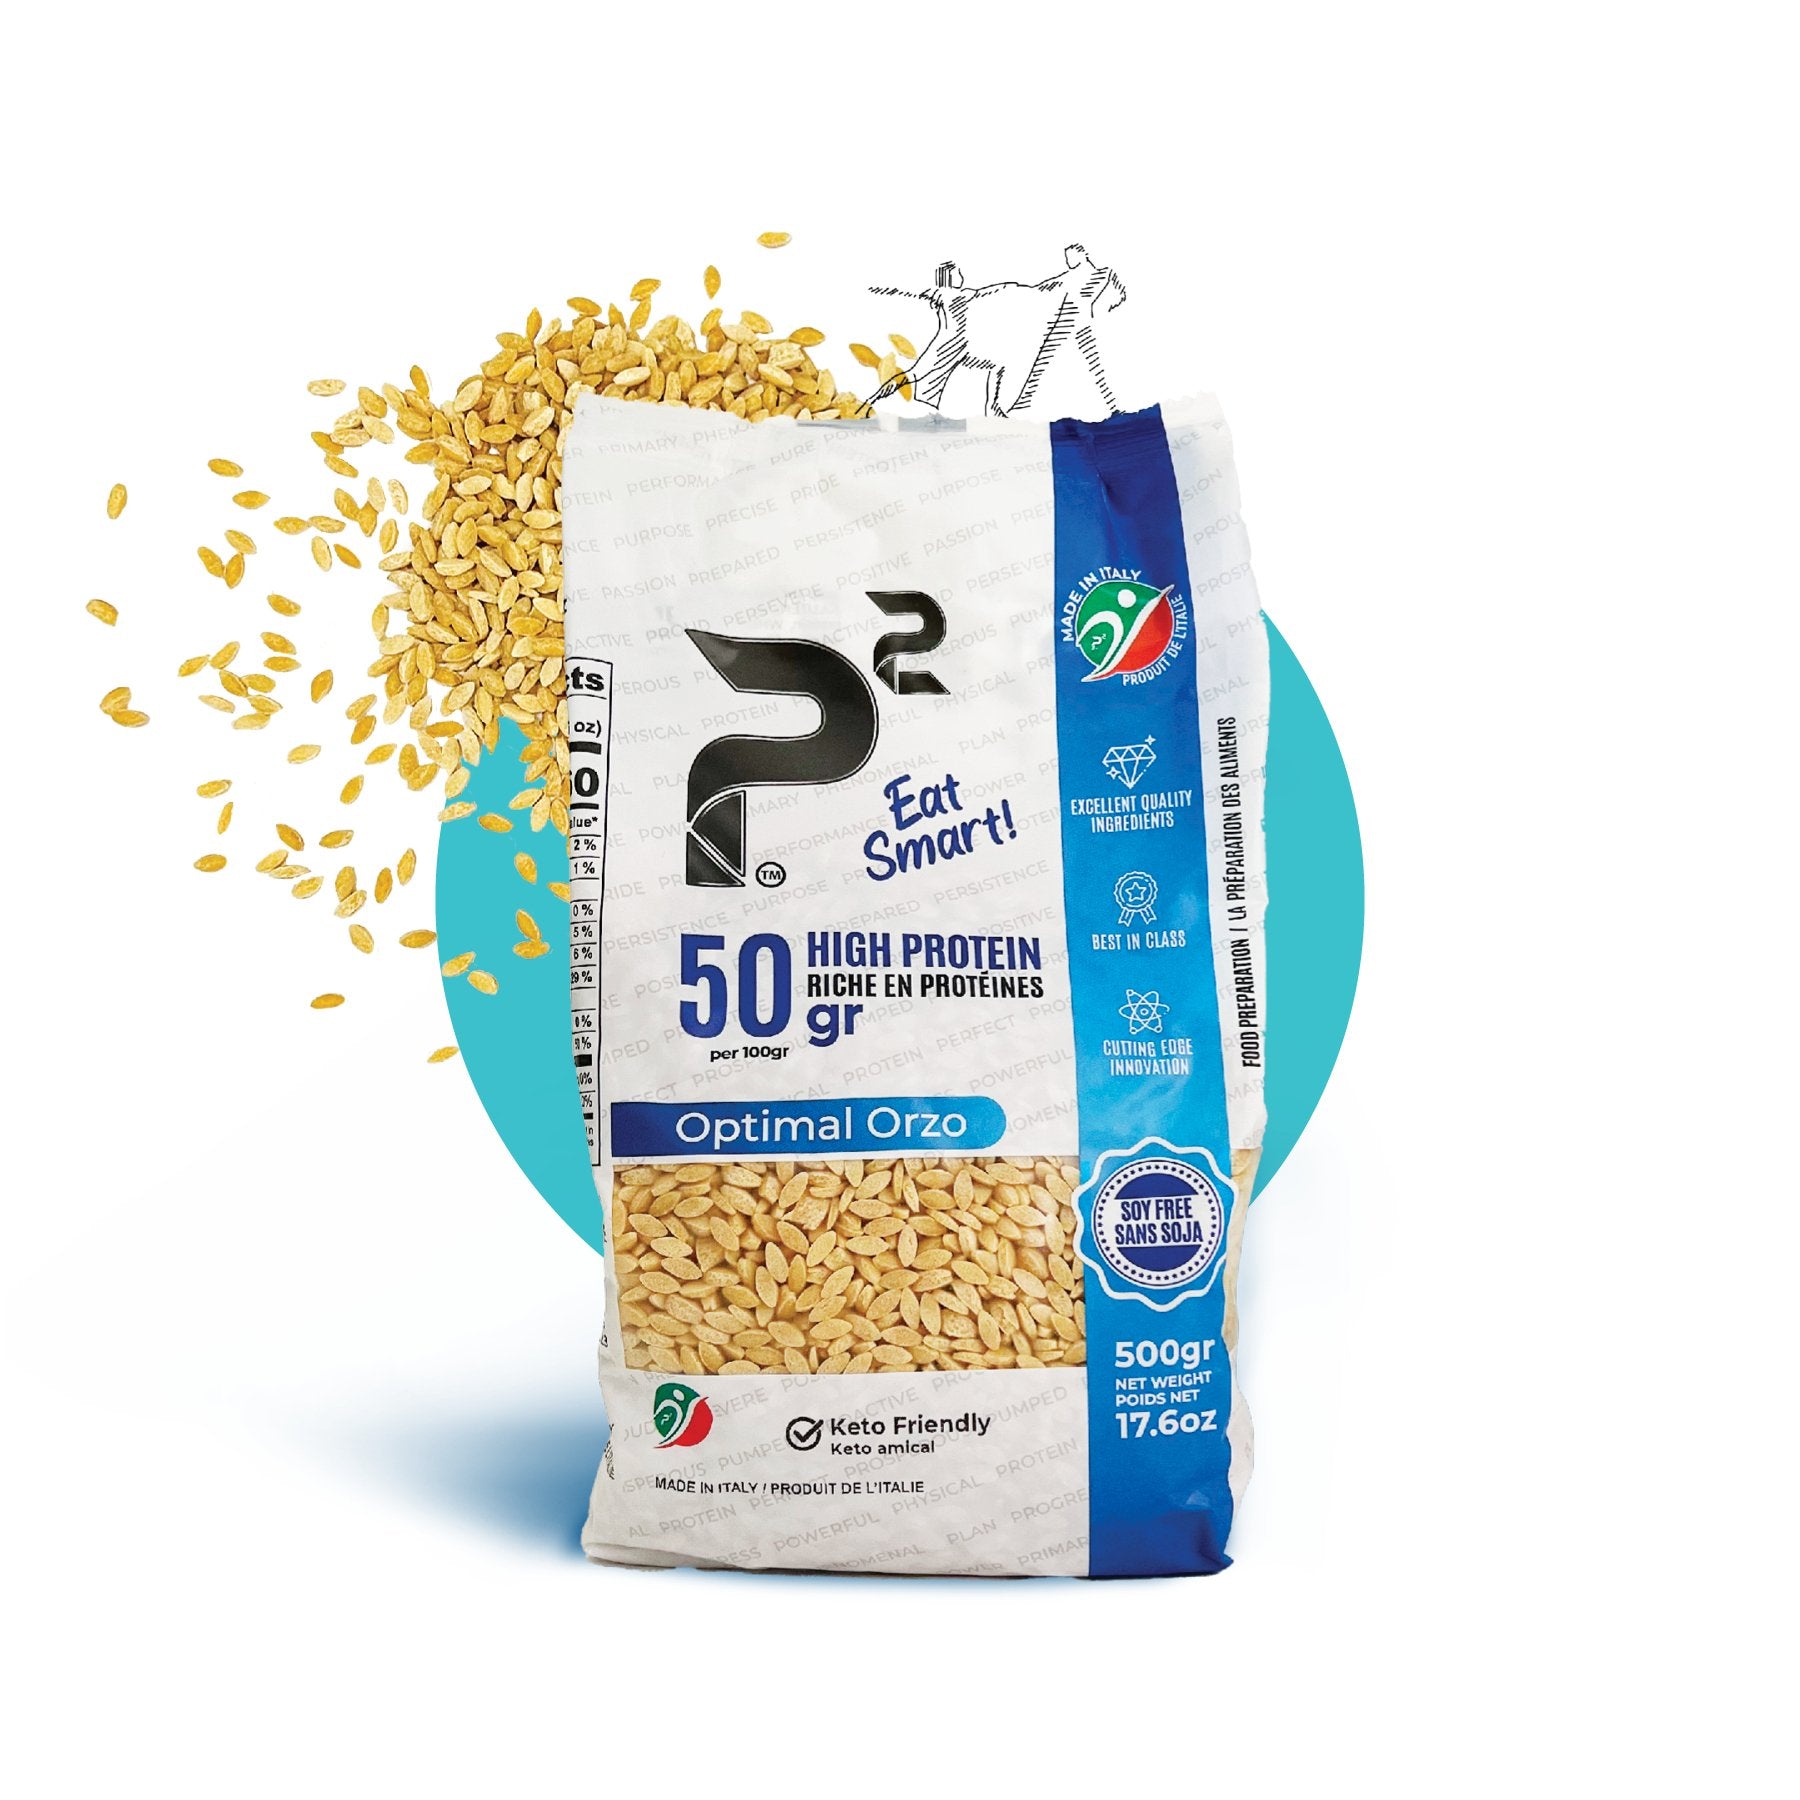 Optimal Orzo 500g High protein, fibre rich, and low carb pasta. 50g protein and 14g net carbs per 100g.